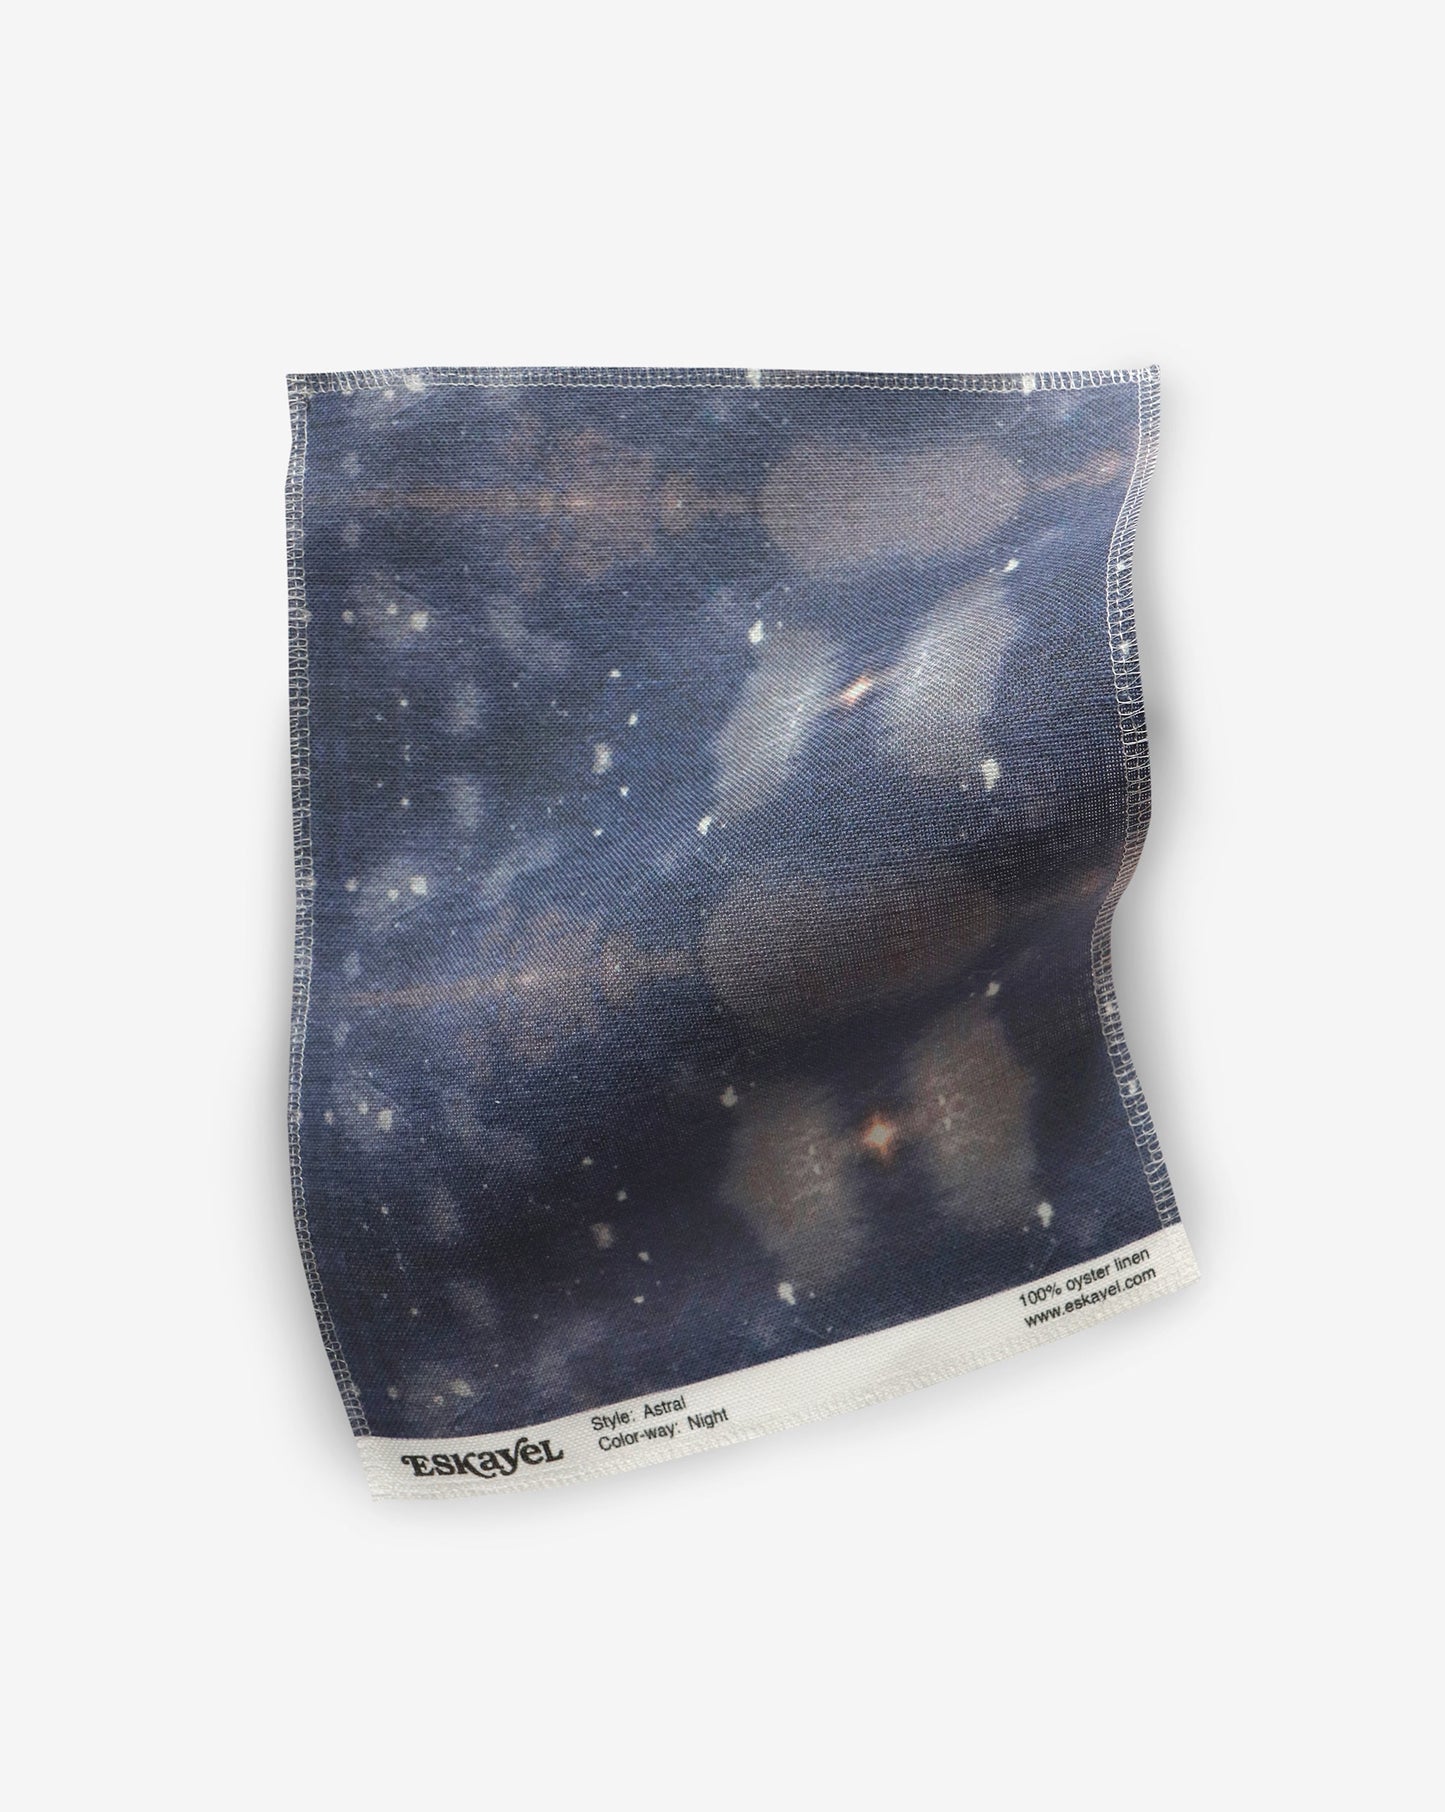 A fabric from the Jangala Collection with an image of Astral Fabric Night